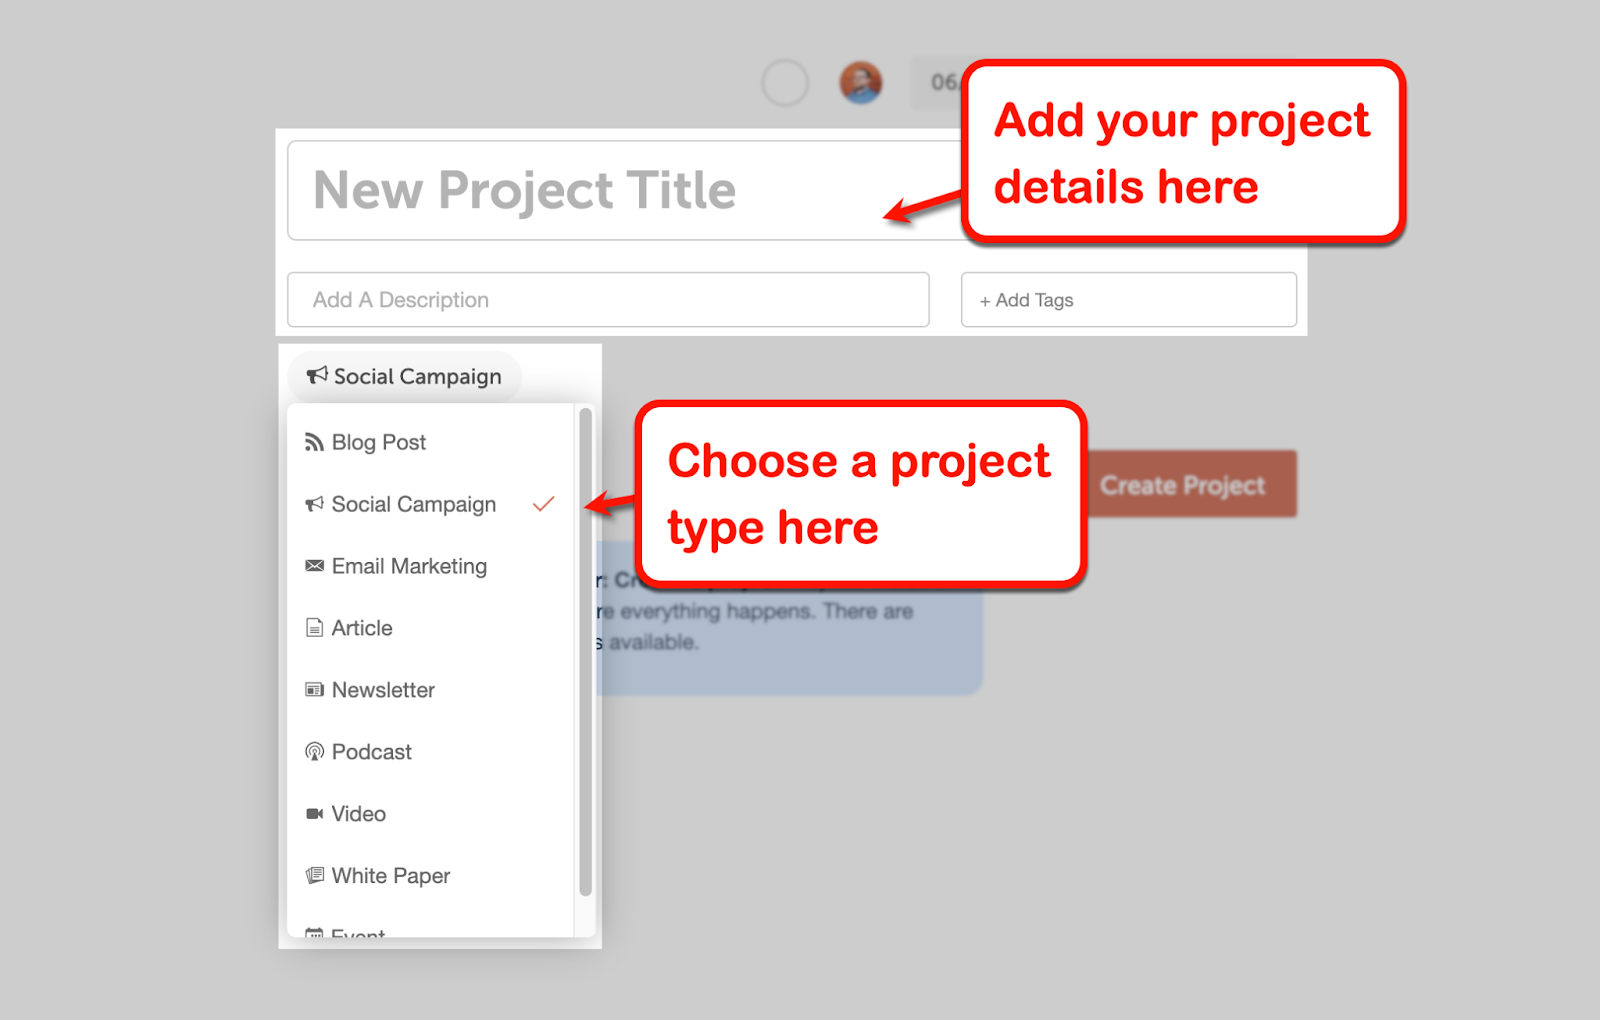 Options where project types are shown